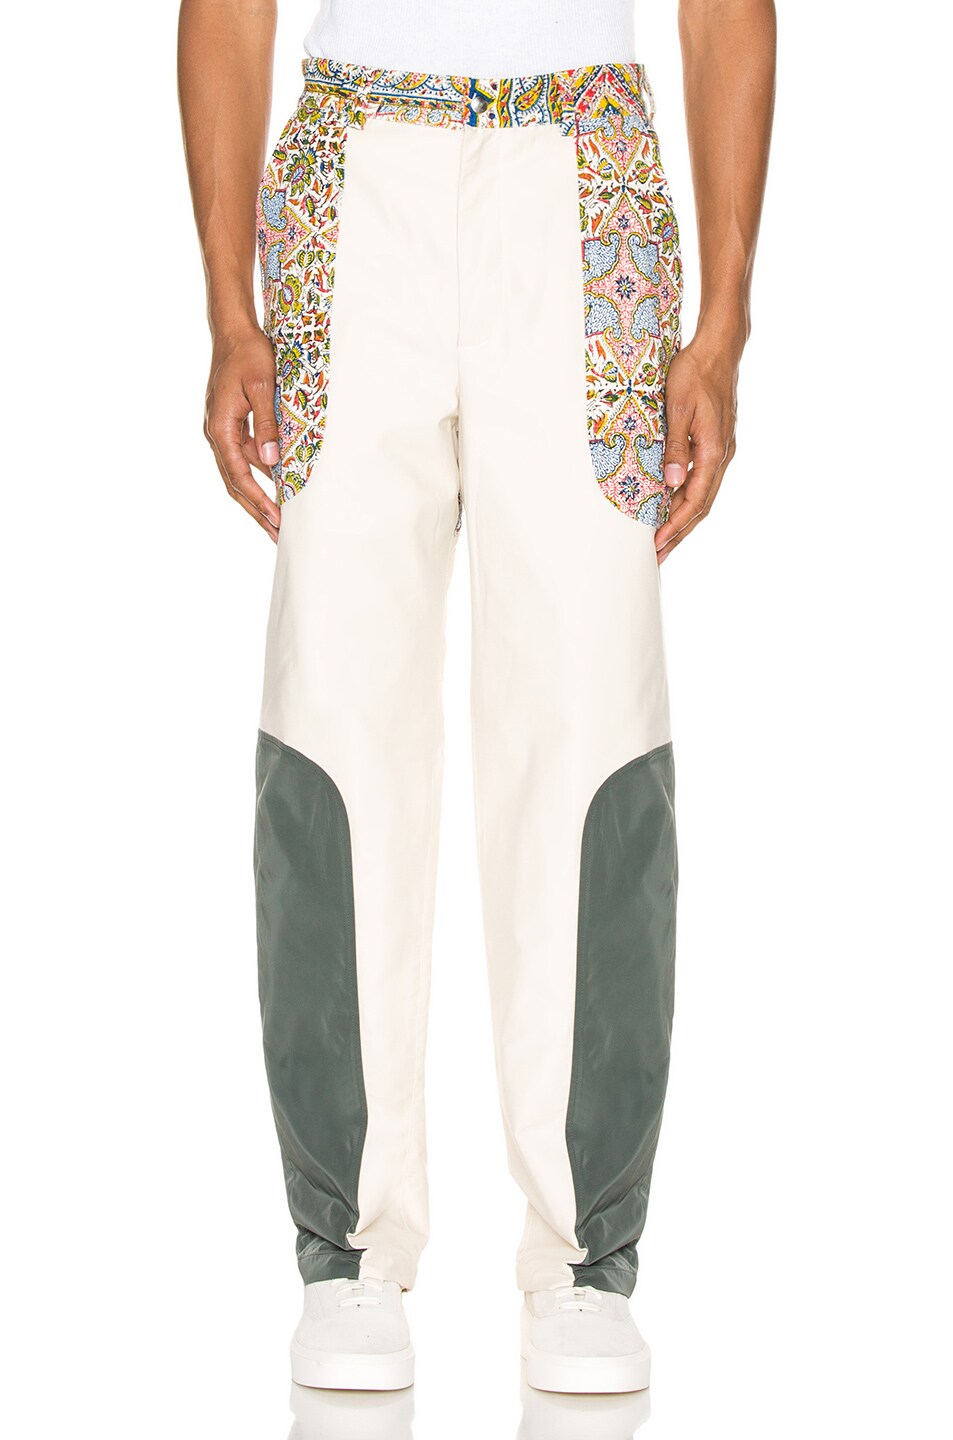 Image 1 of Paria Farzaneh Iranian Panel Suit Trousers in Multi